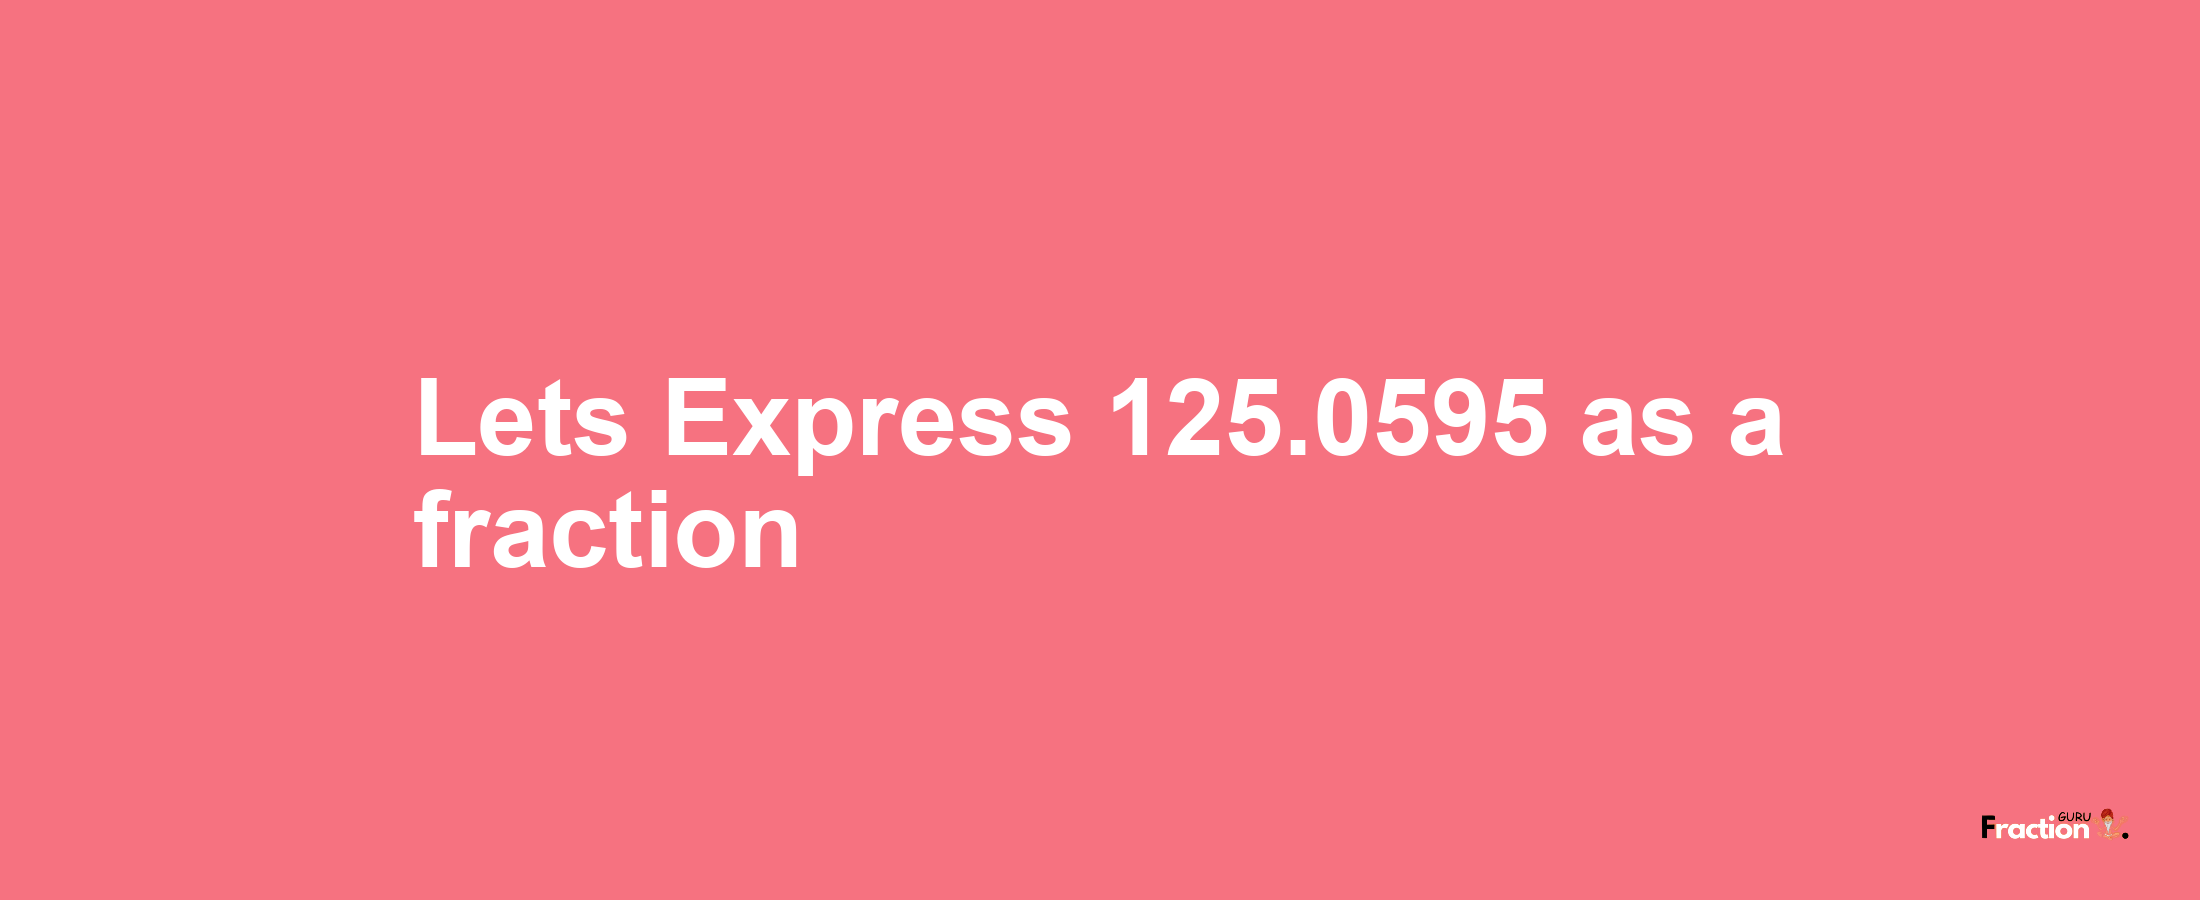 Lets Express 125.0595 as afraction